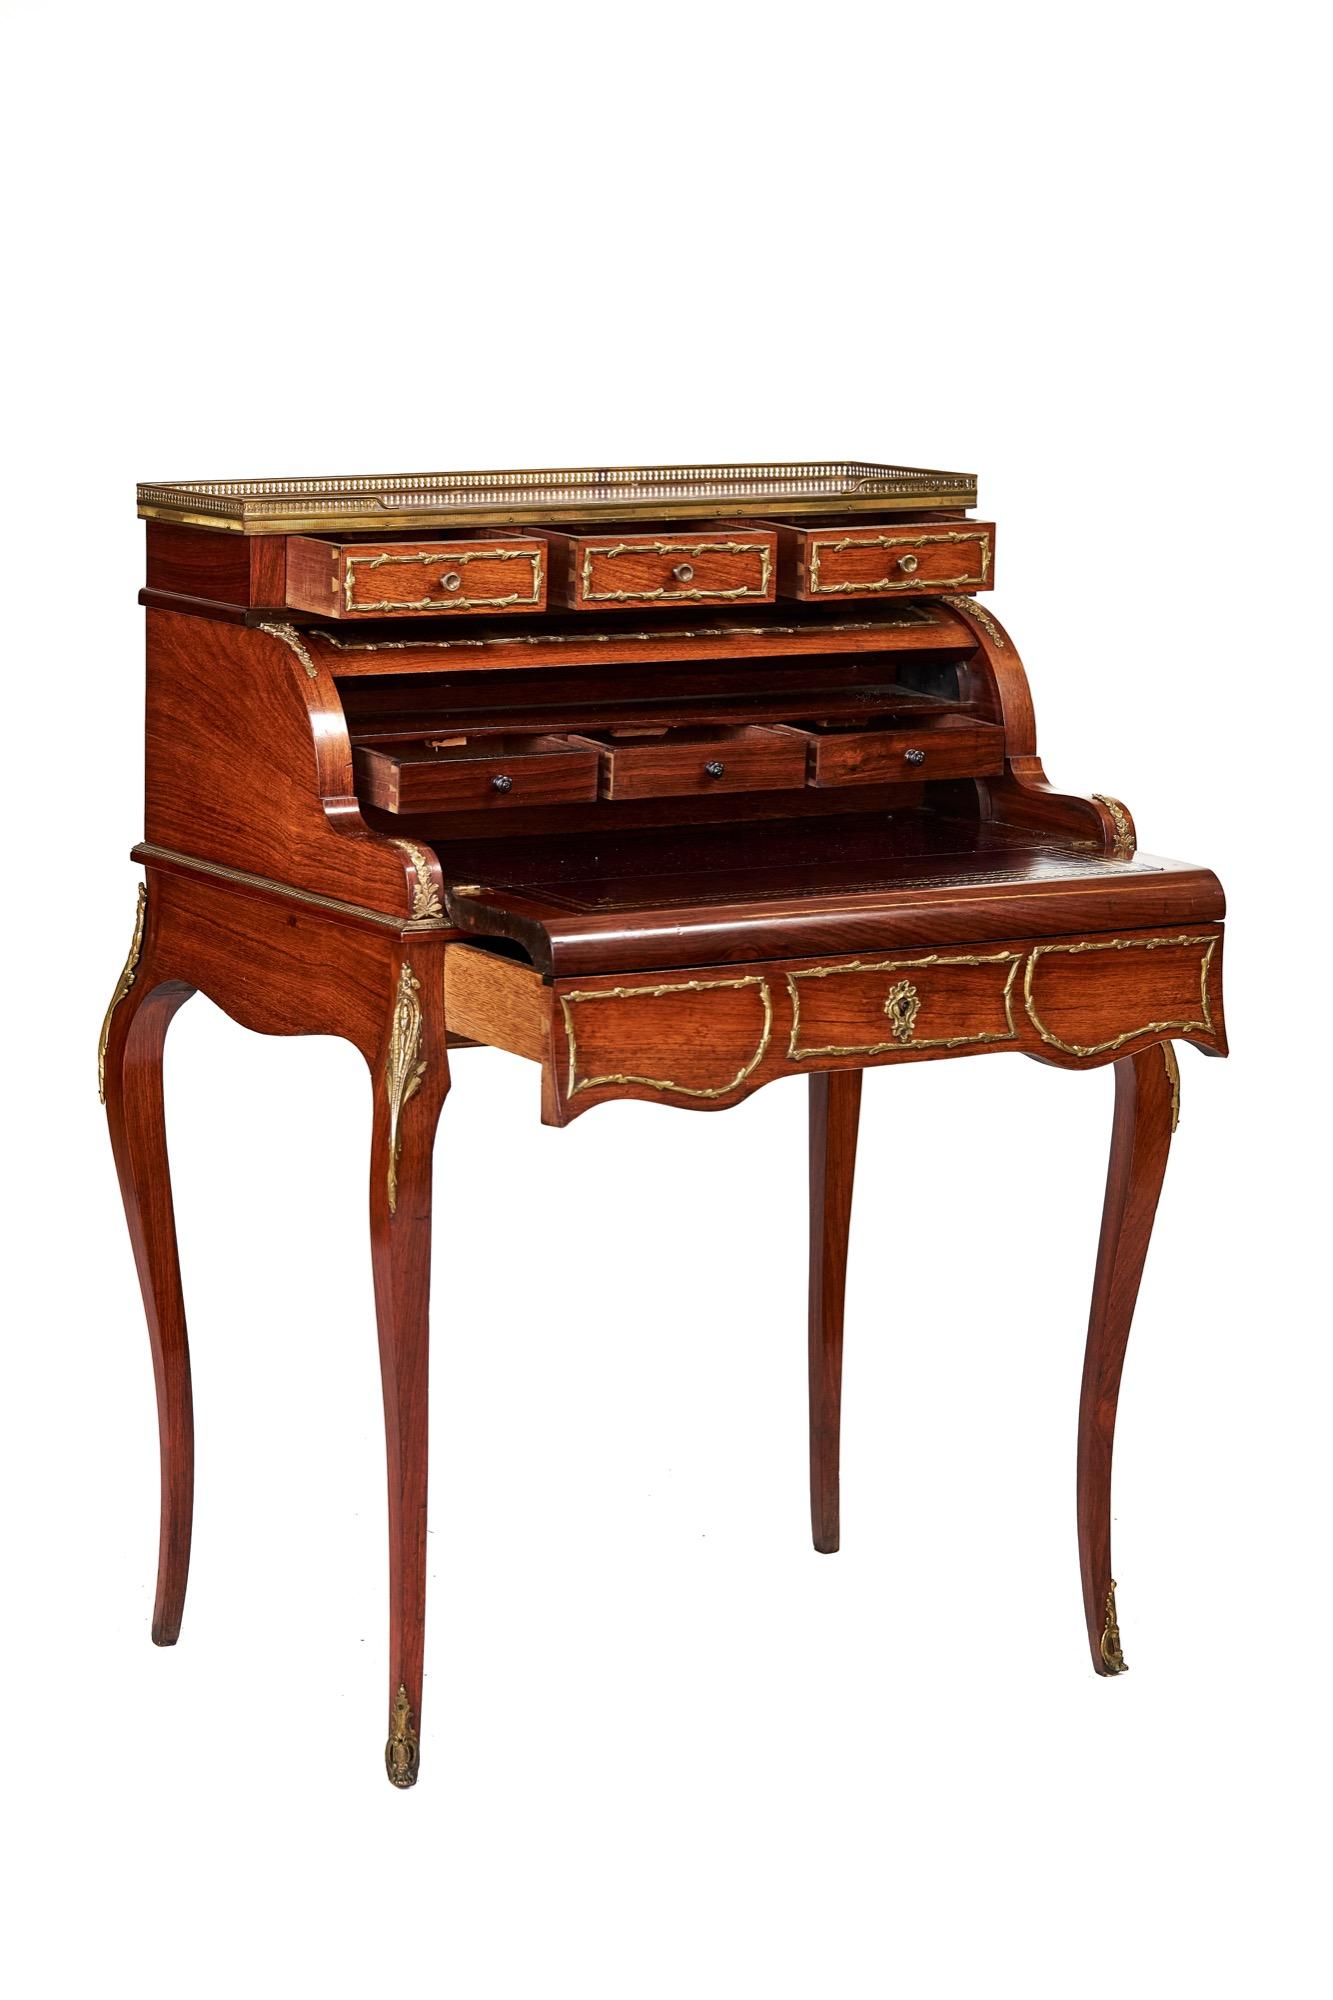 Antique Louis XV Vernis Martin style rosewood Bureau de Dame having a marble top with three quarter brass gallery over three small drawers. The upper section with cartonnier which opens up by sliding the central drawer to reveal three further small